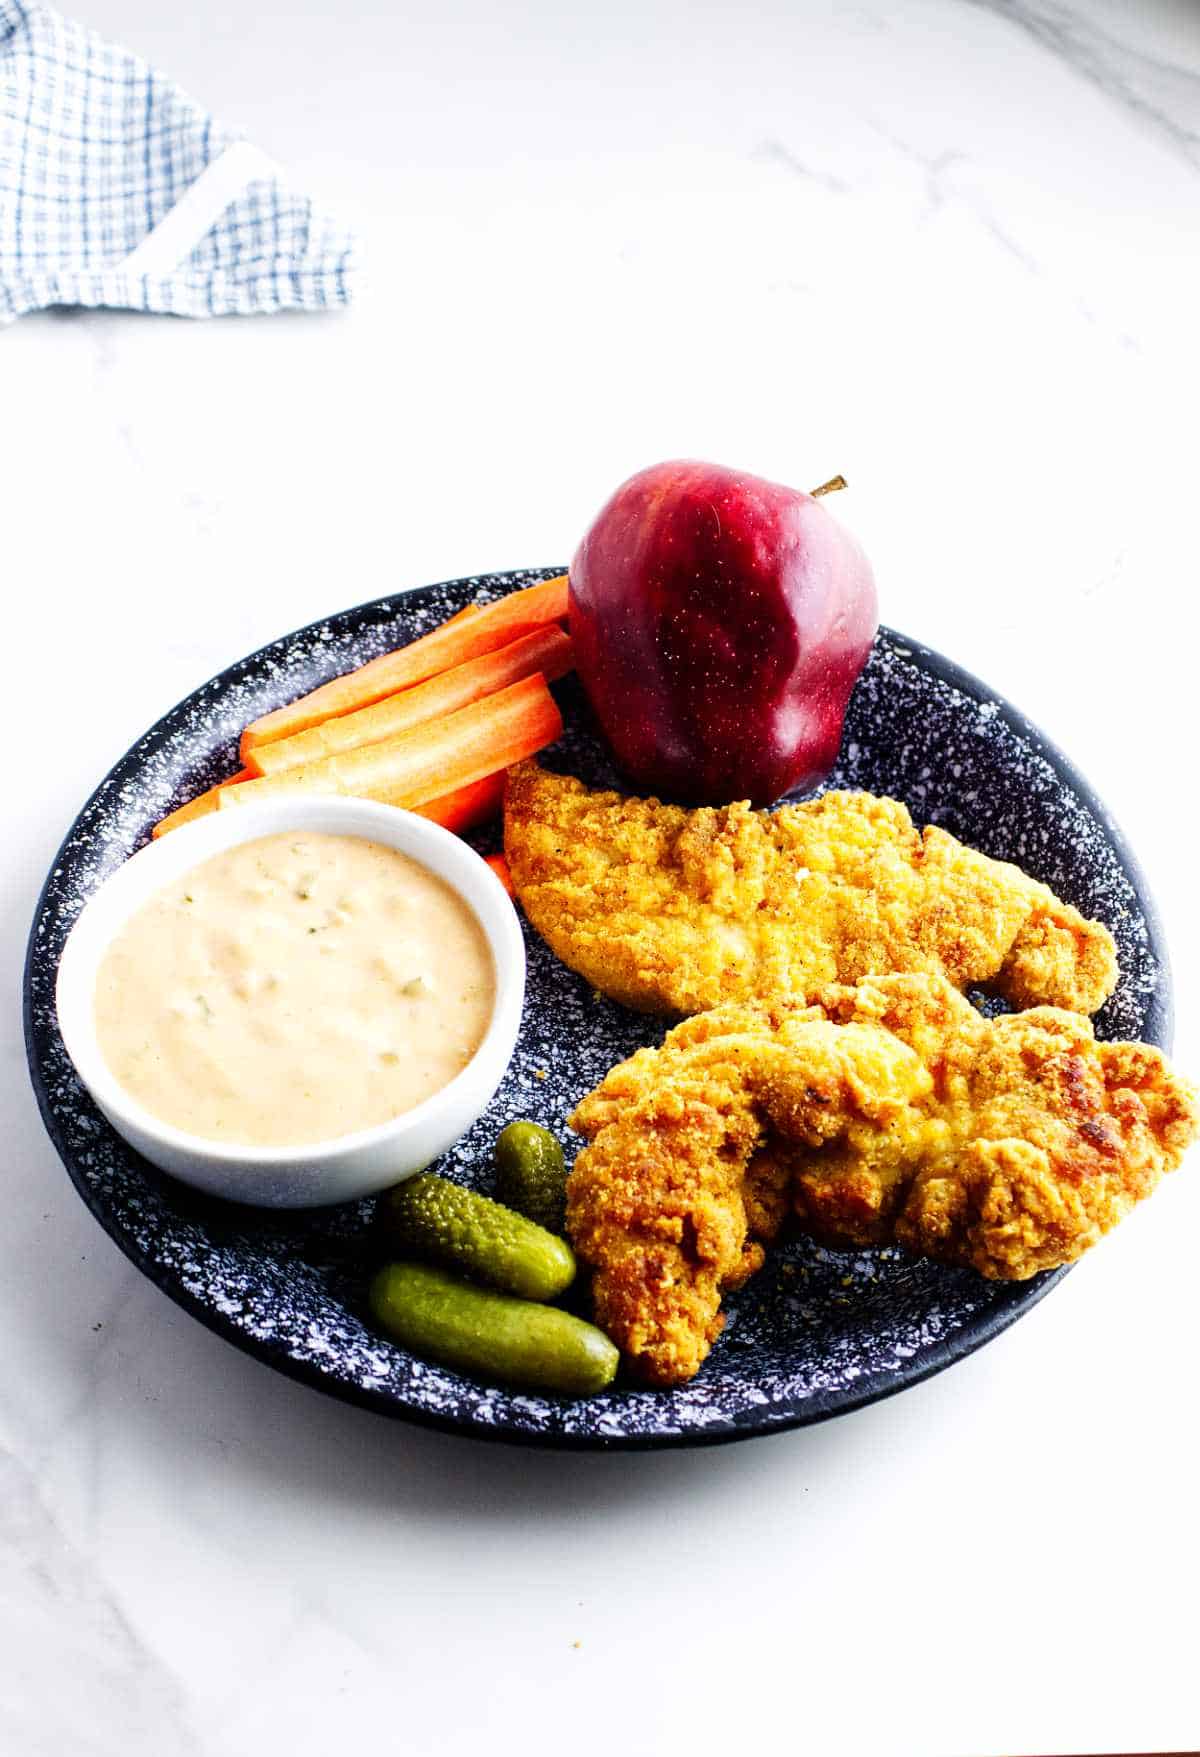 healthy child's lunch plate with apple, carrot sticks, pickles, and air fryer frozen chicken tenders with dip.